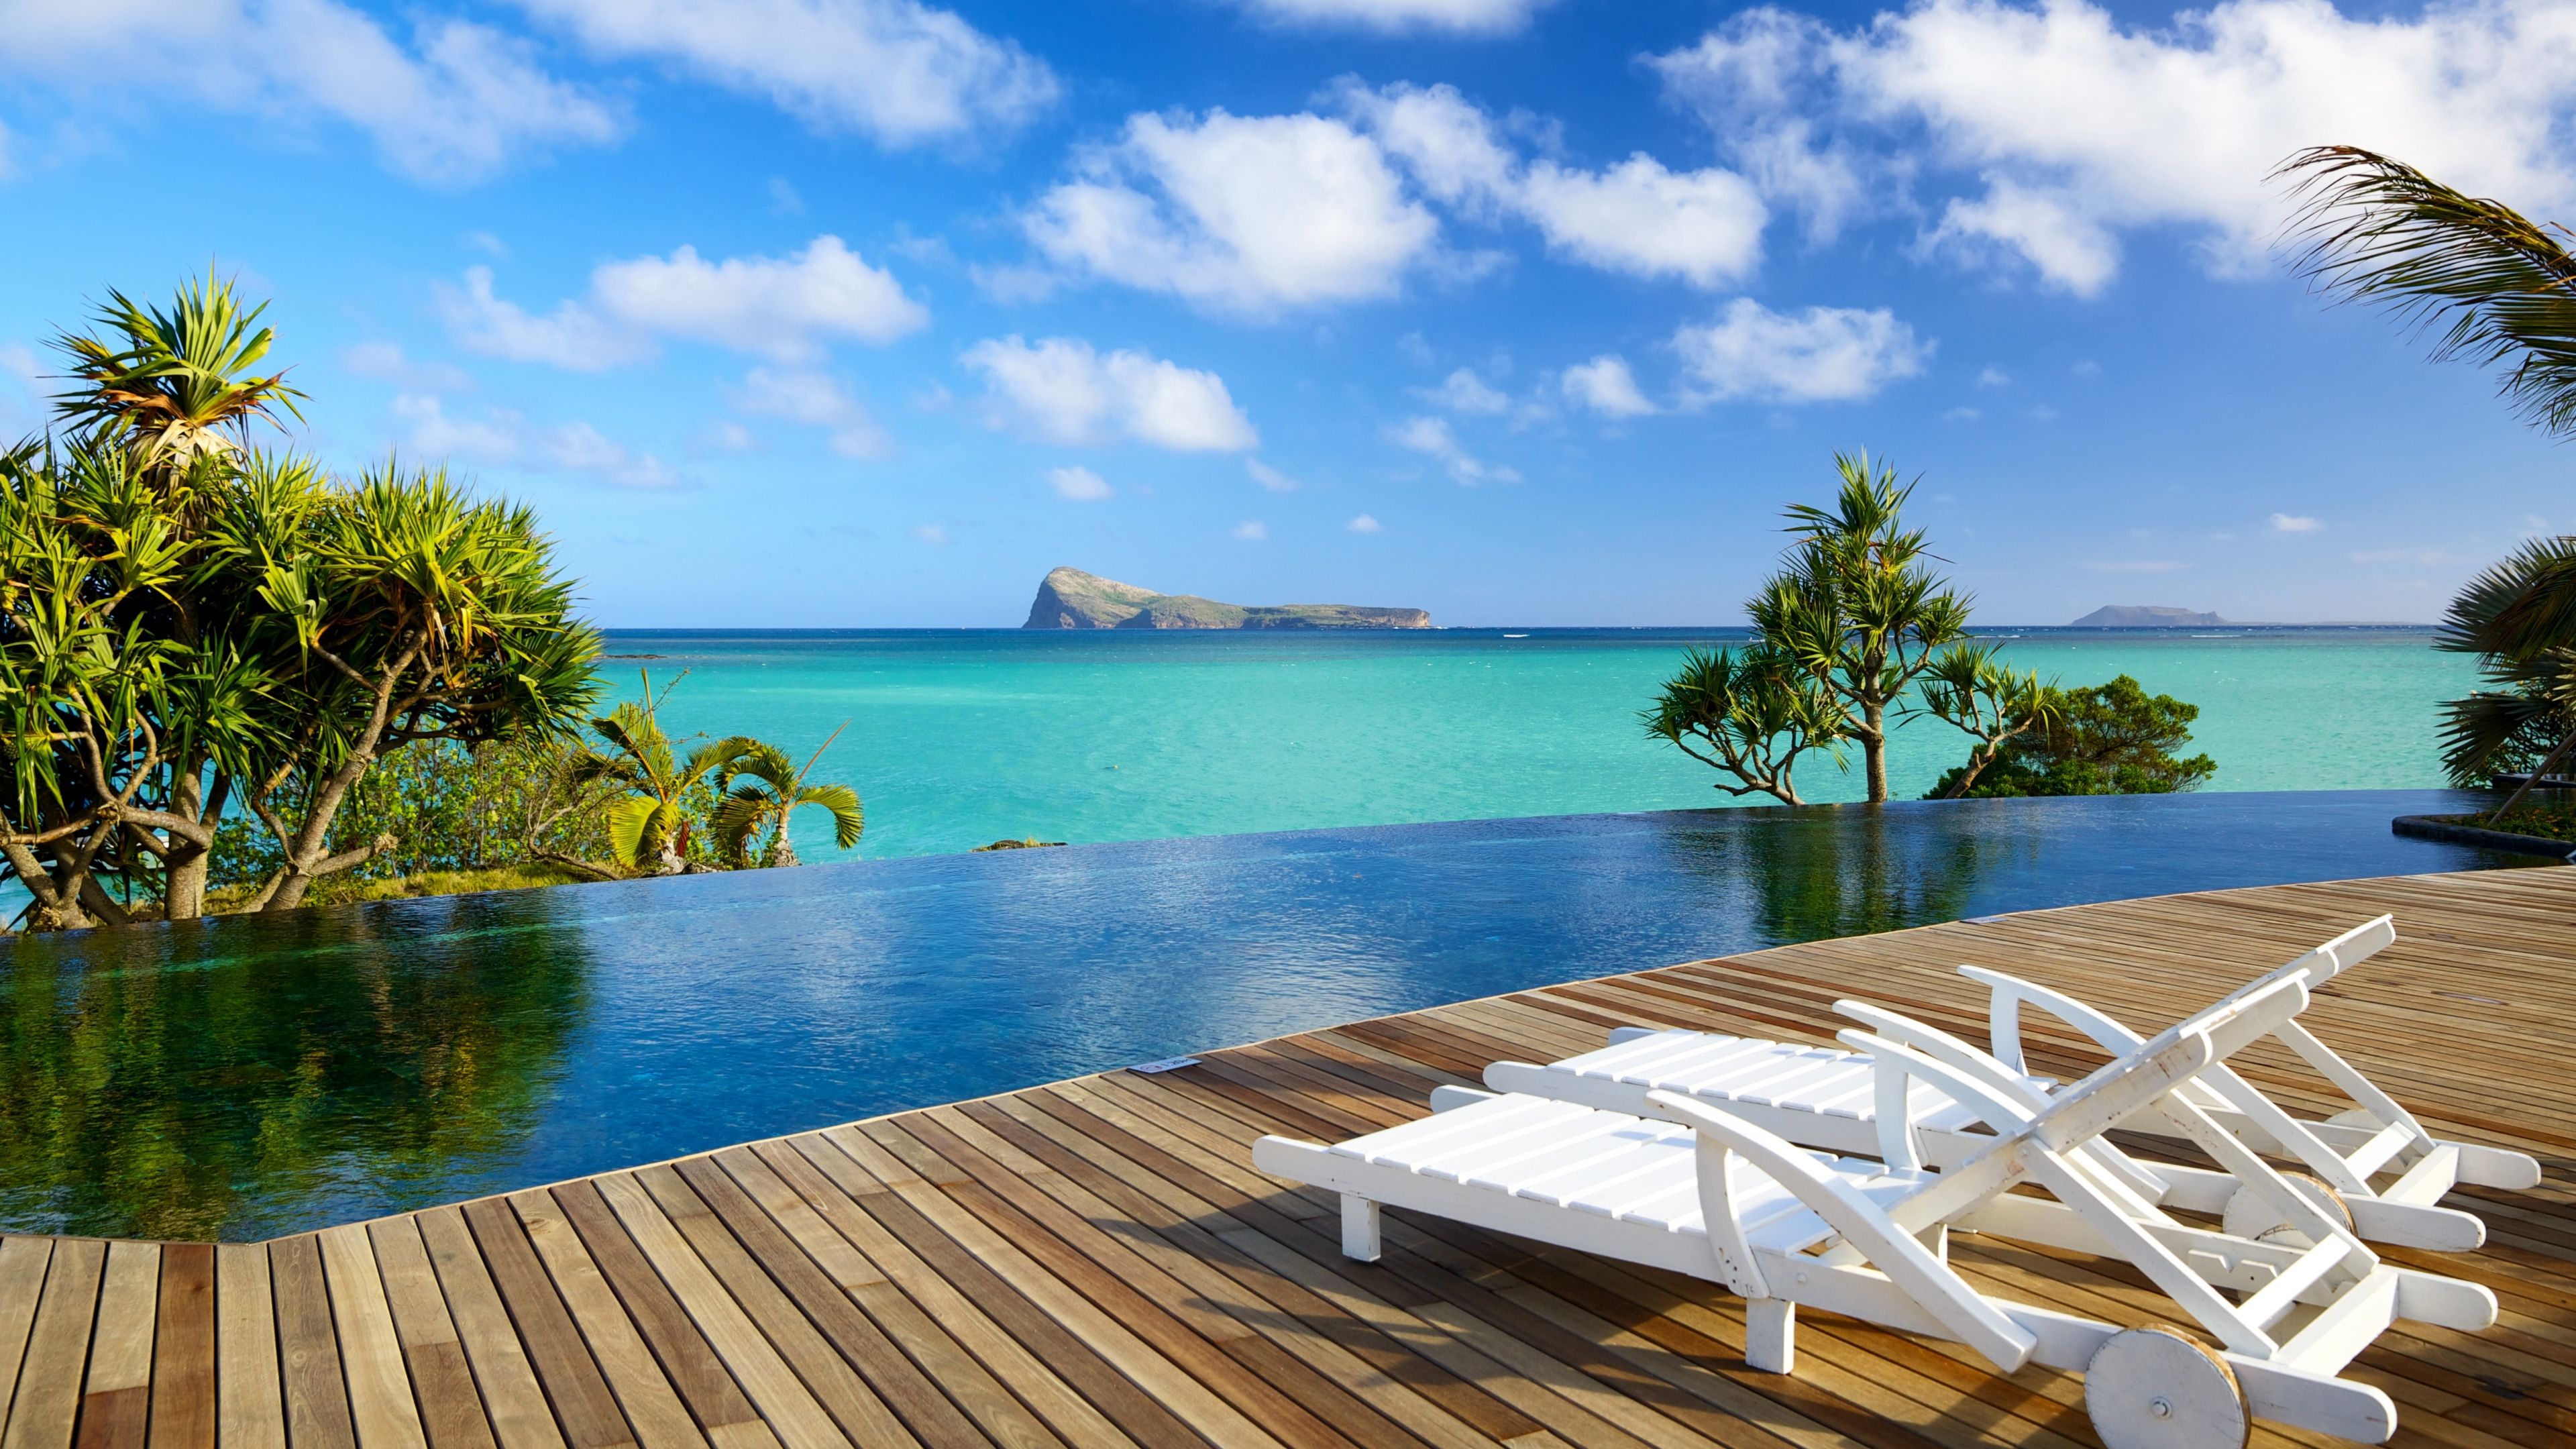 Relax in Mauritius Ultra HD wallpapers